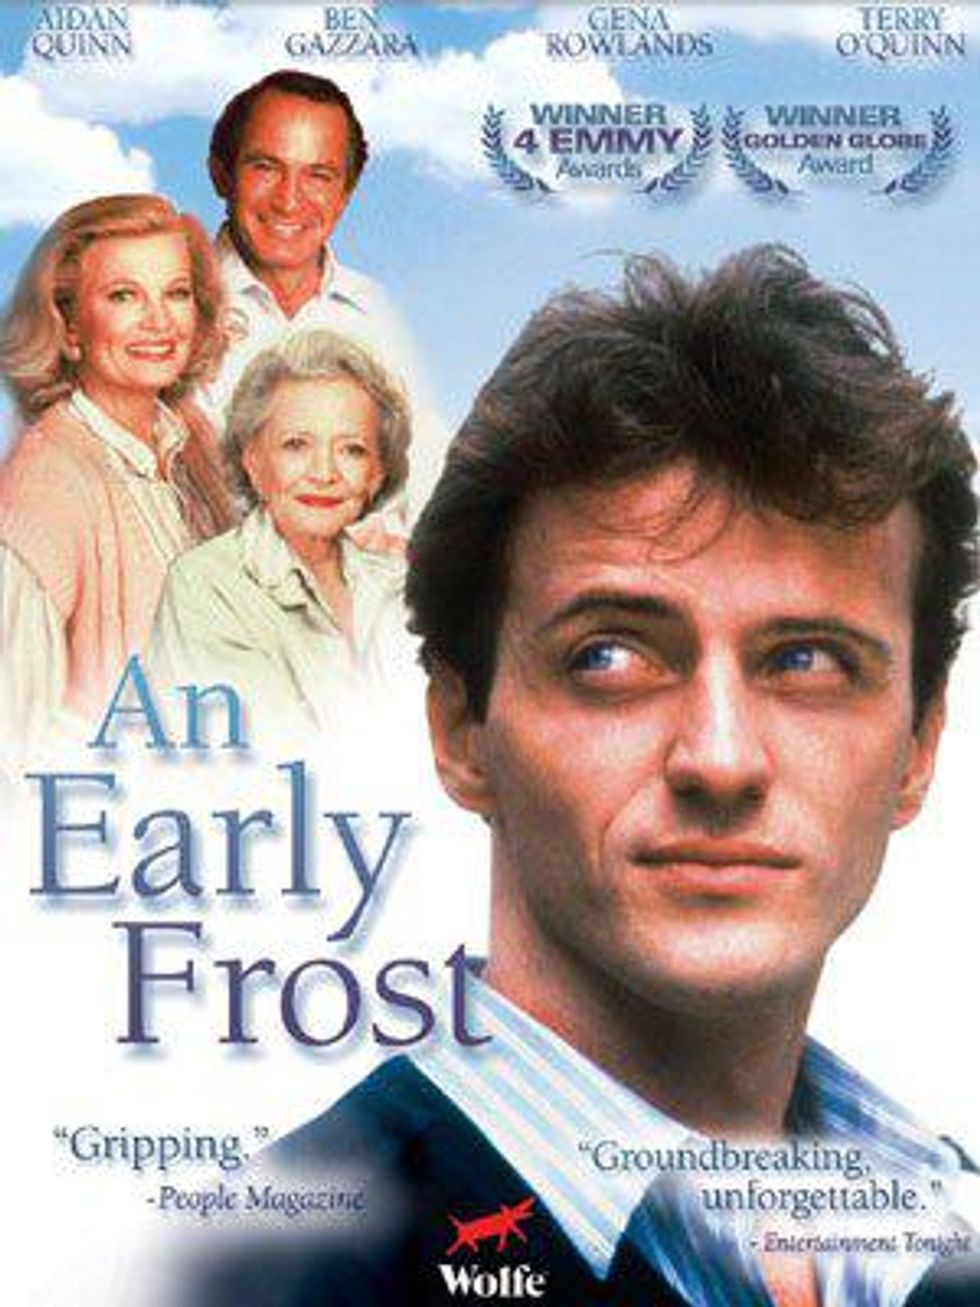 9. An Early Frost